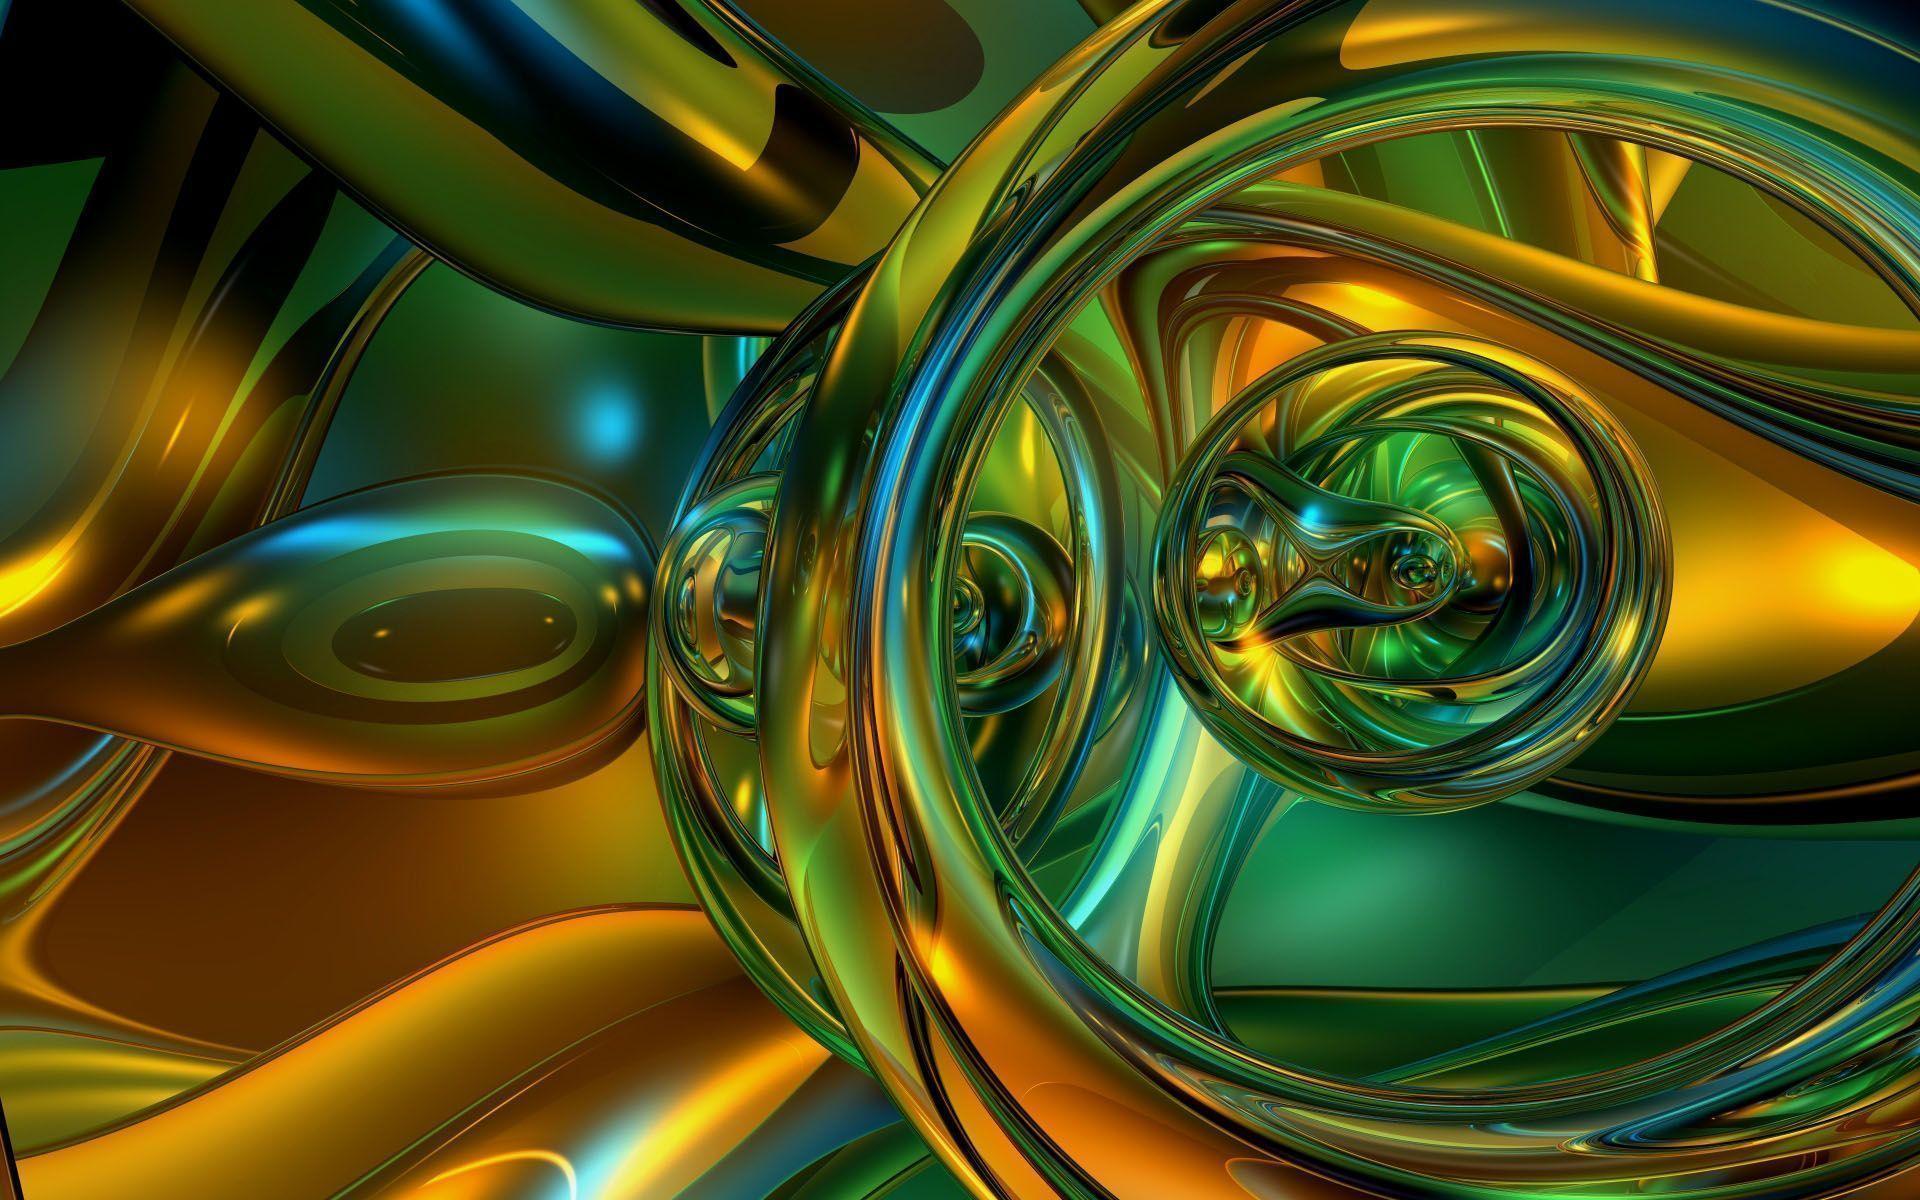 3D Abstract Picture Image. Download High Quality Resolution